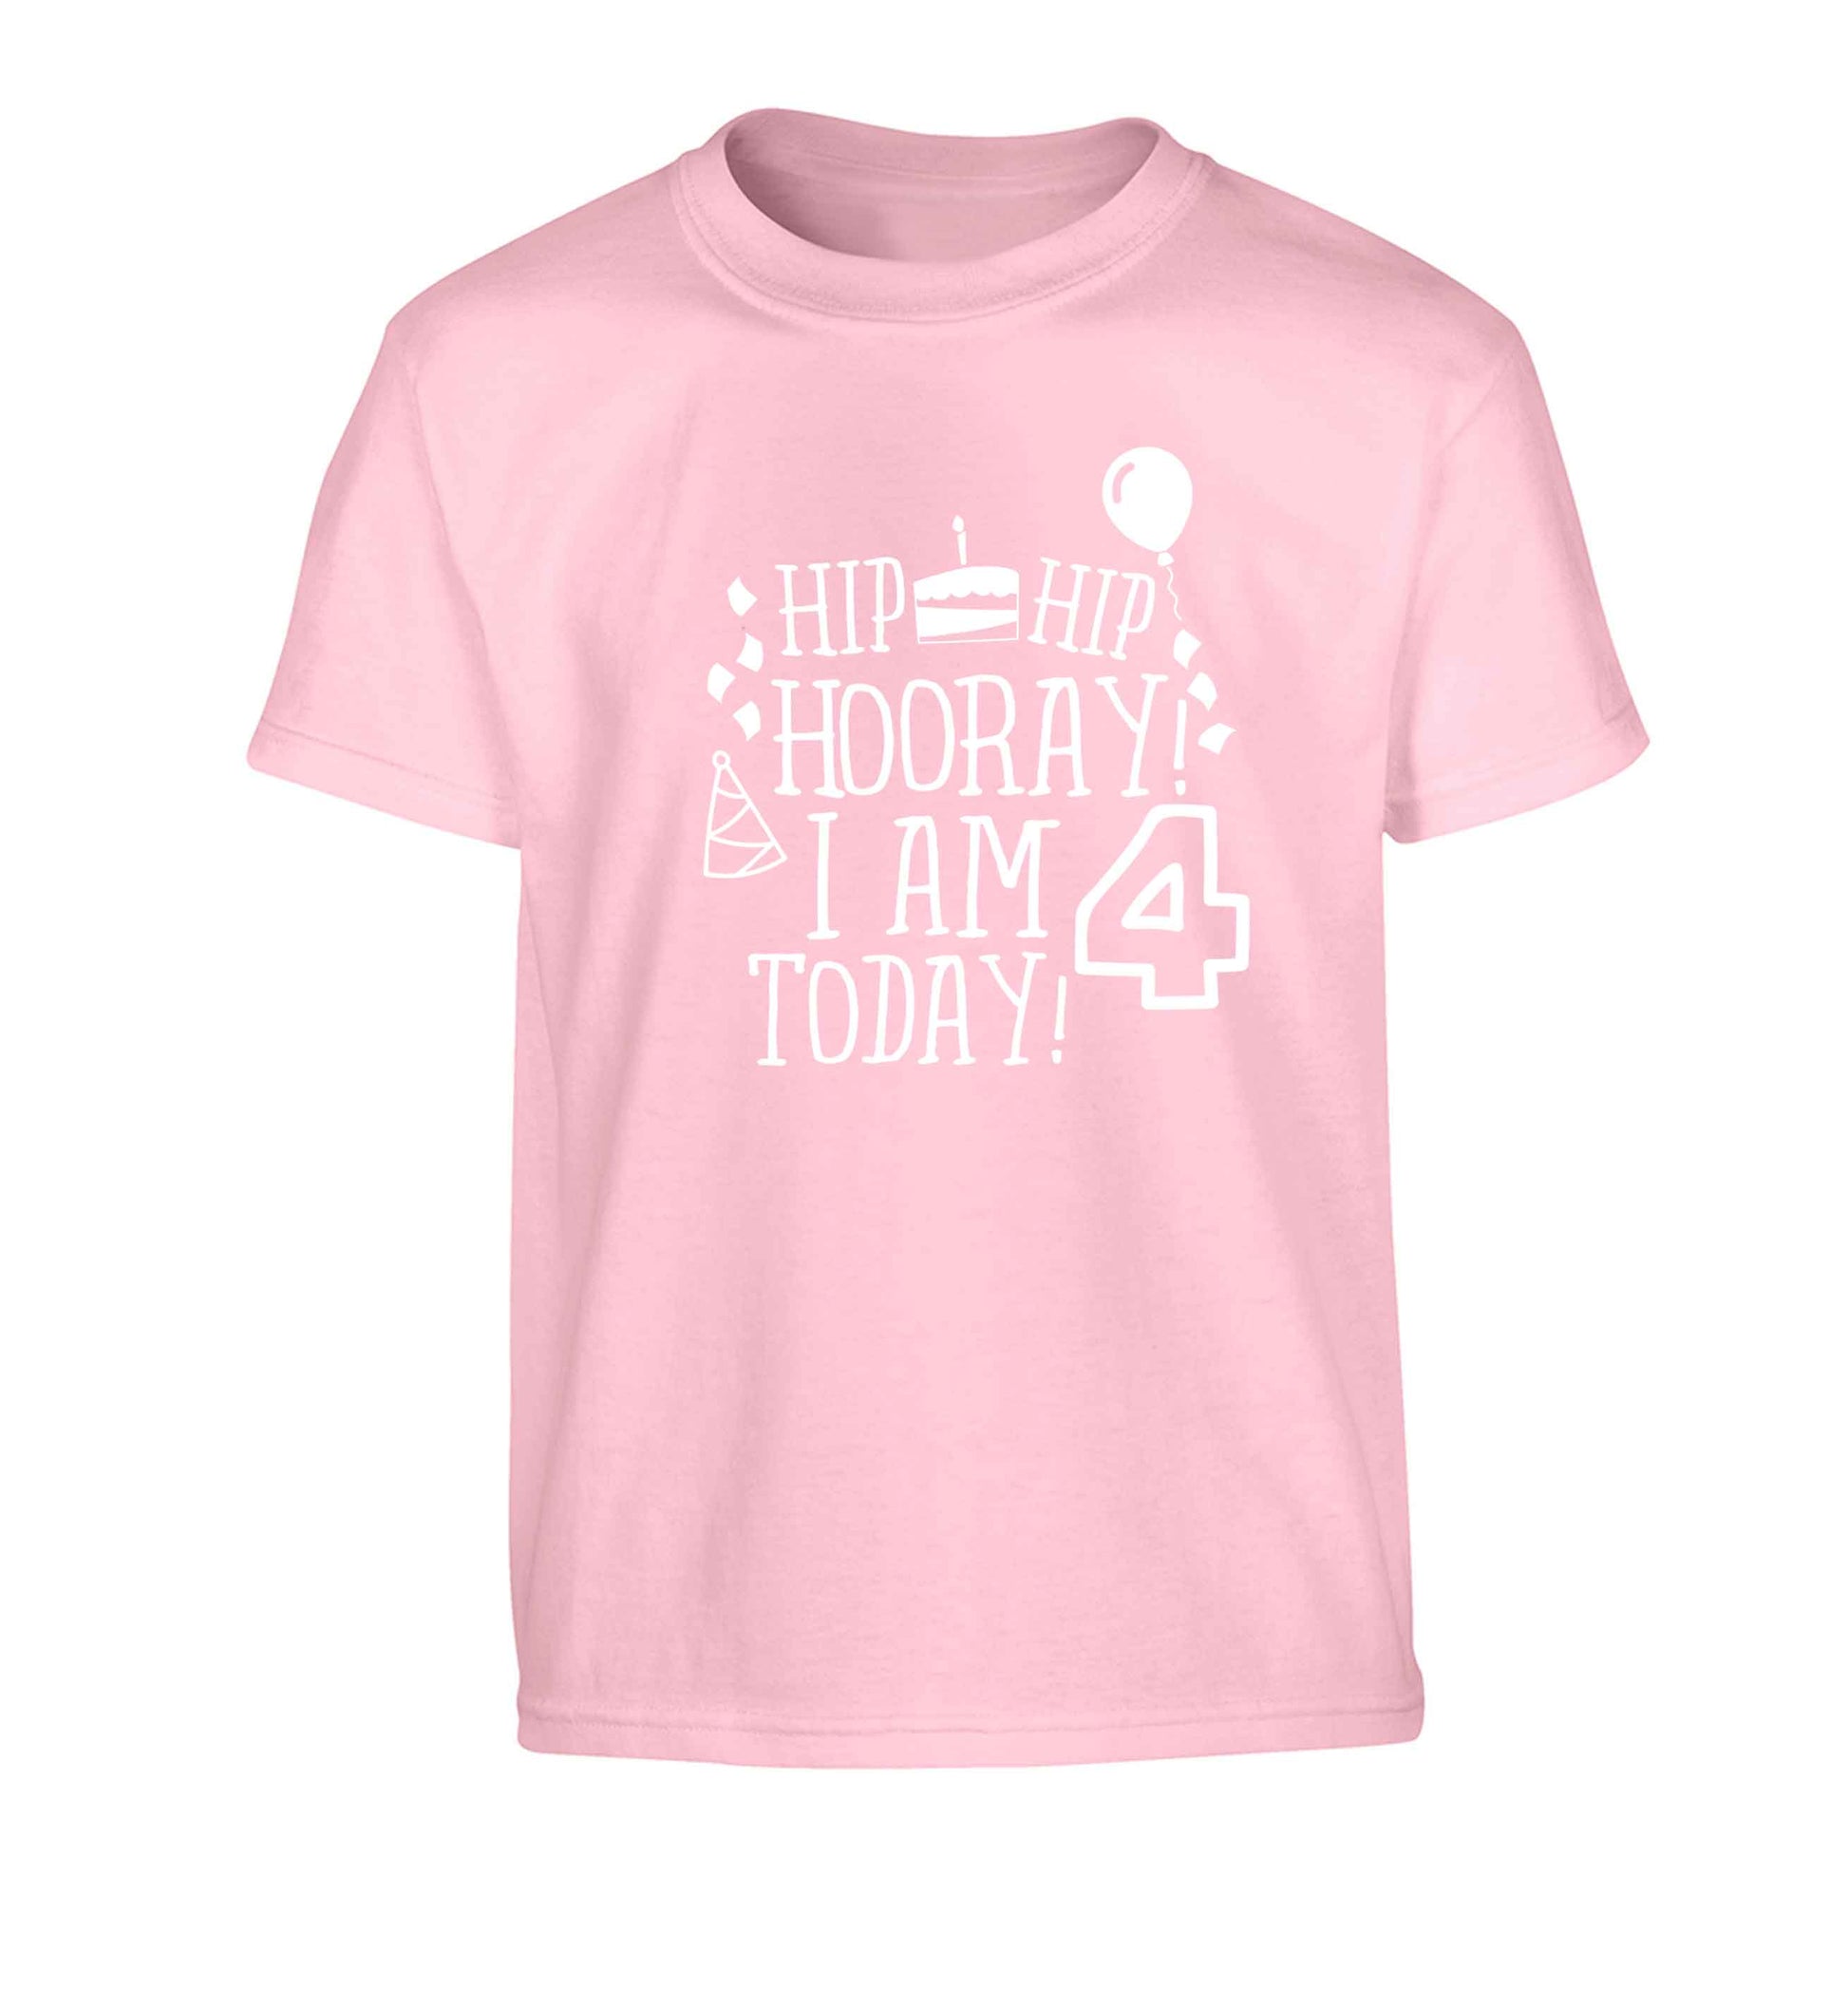 Hip hip hooray I am four today! Children's light pink Tshirt 12-13 Years